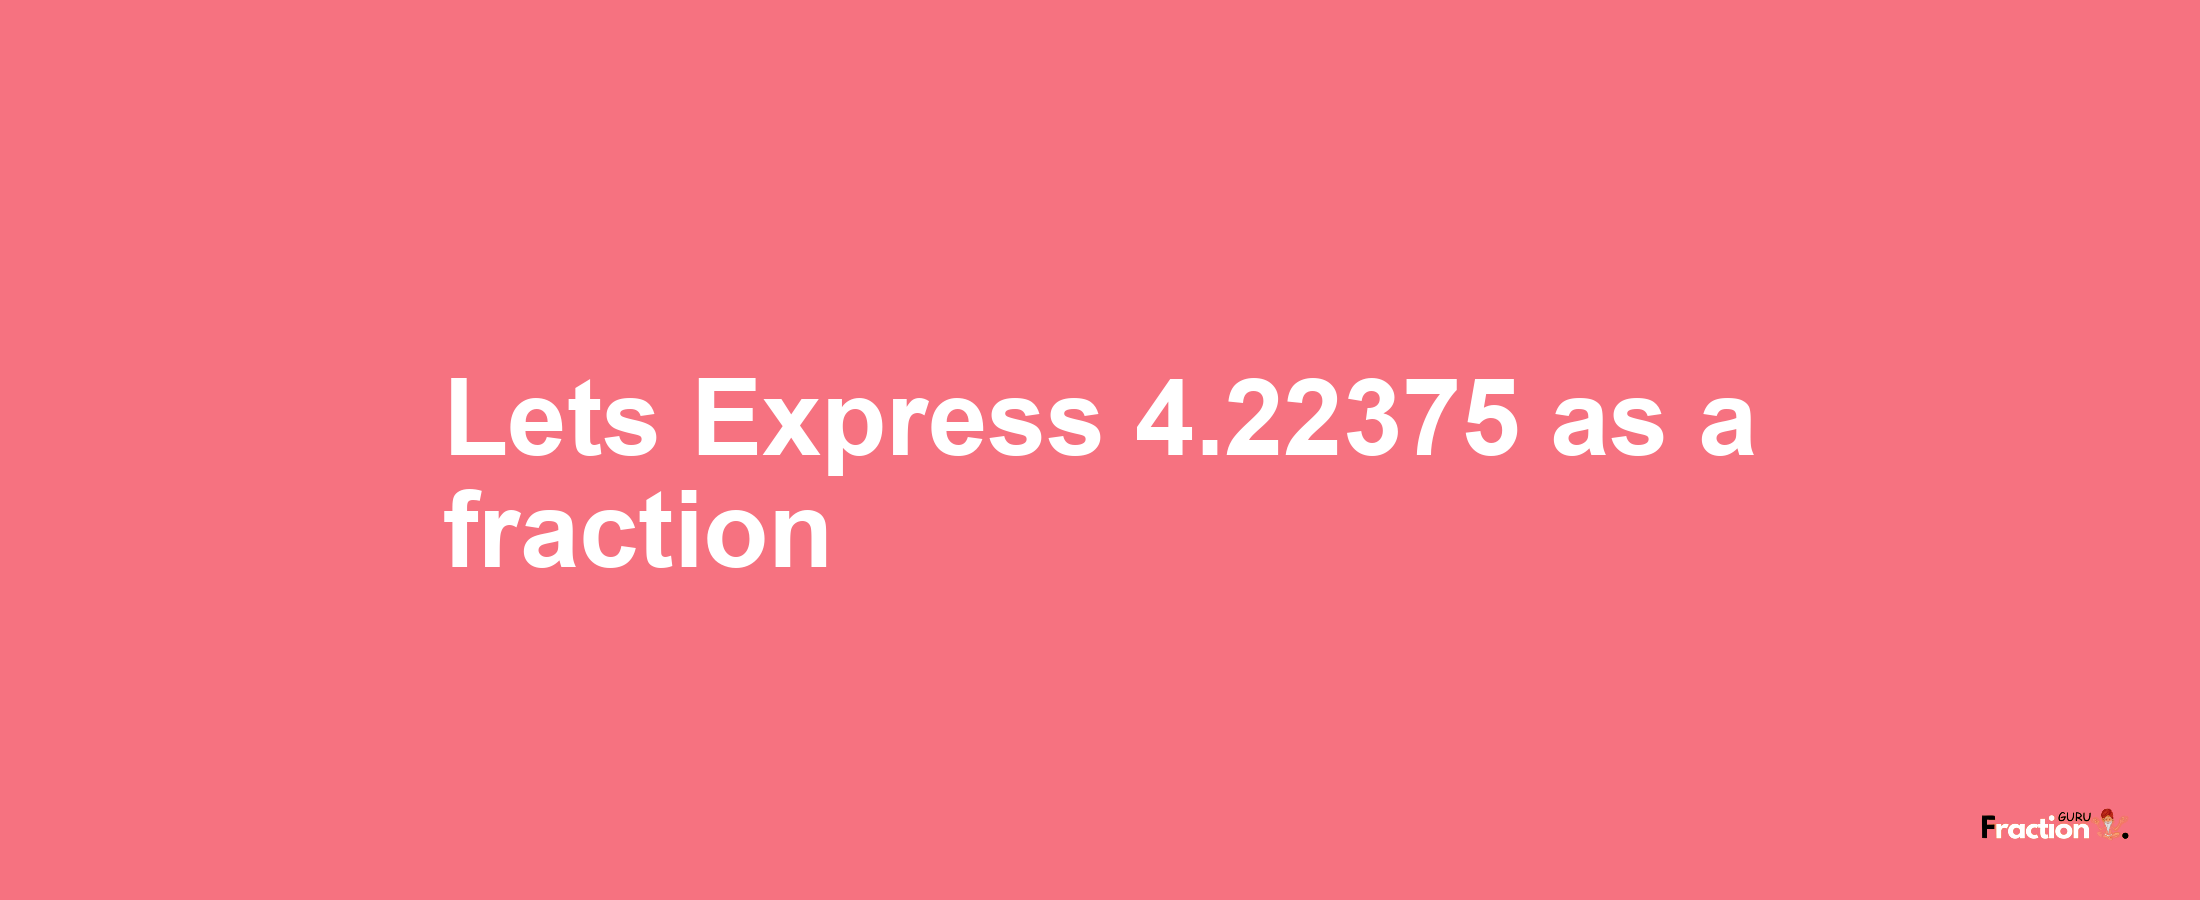 Lets Express 4.22375 as afraction